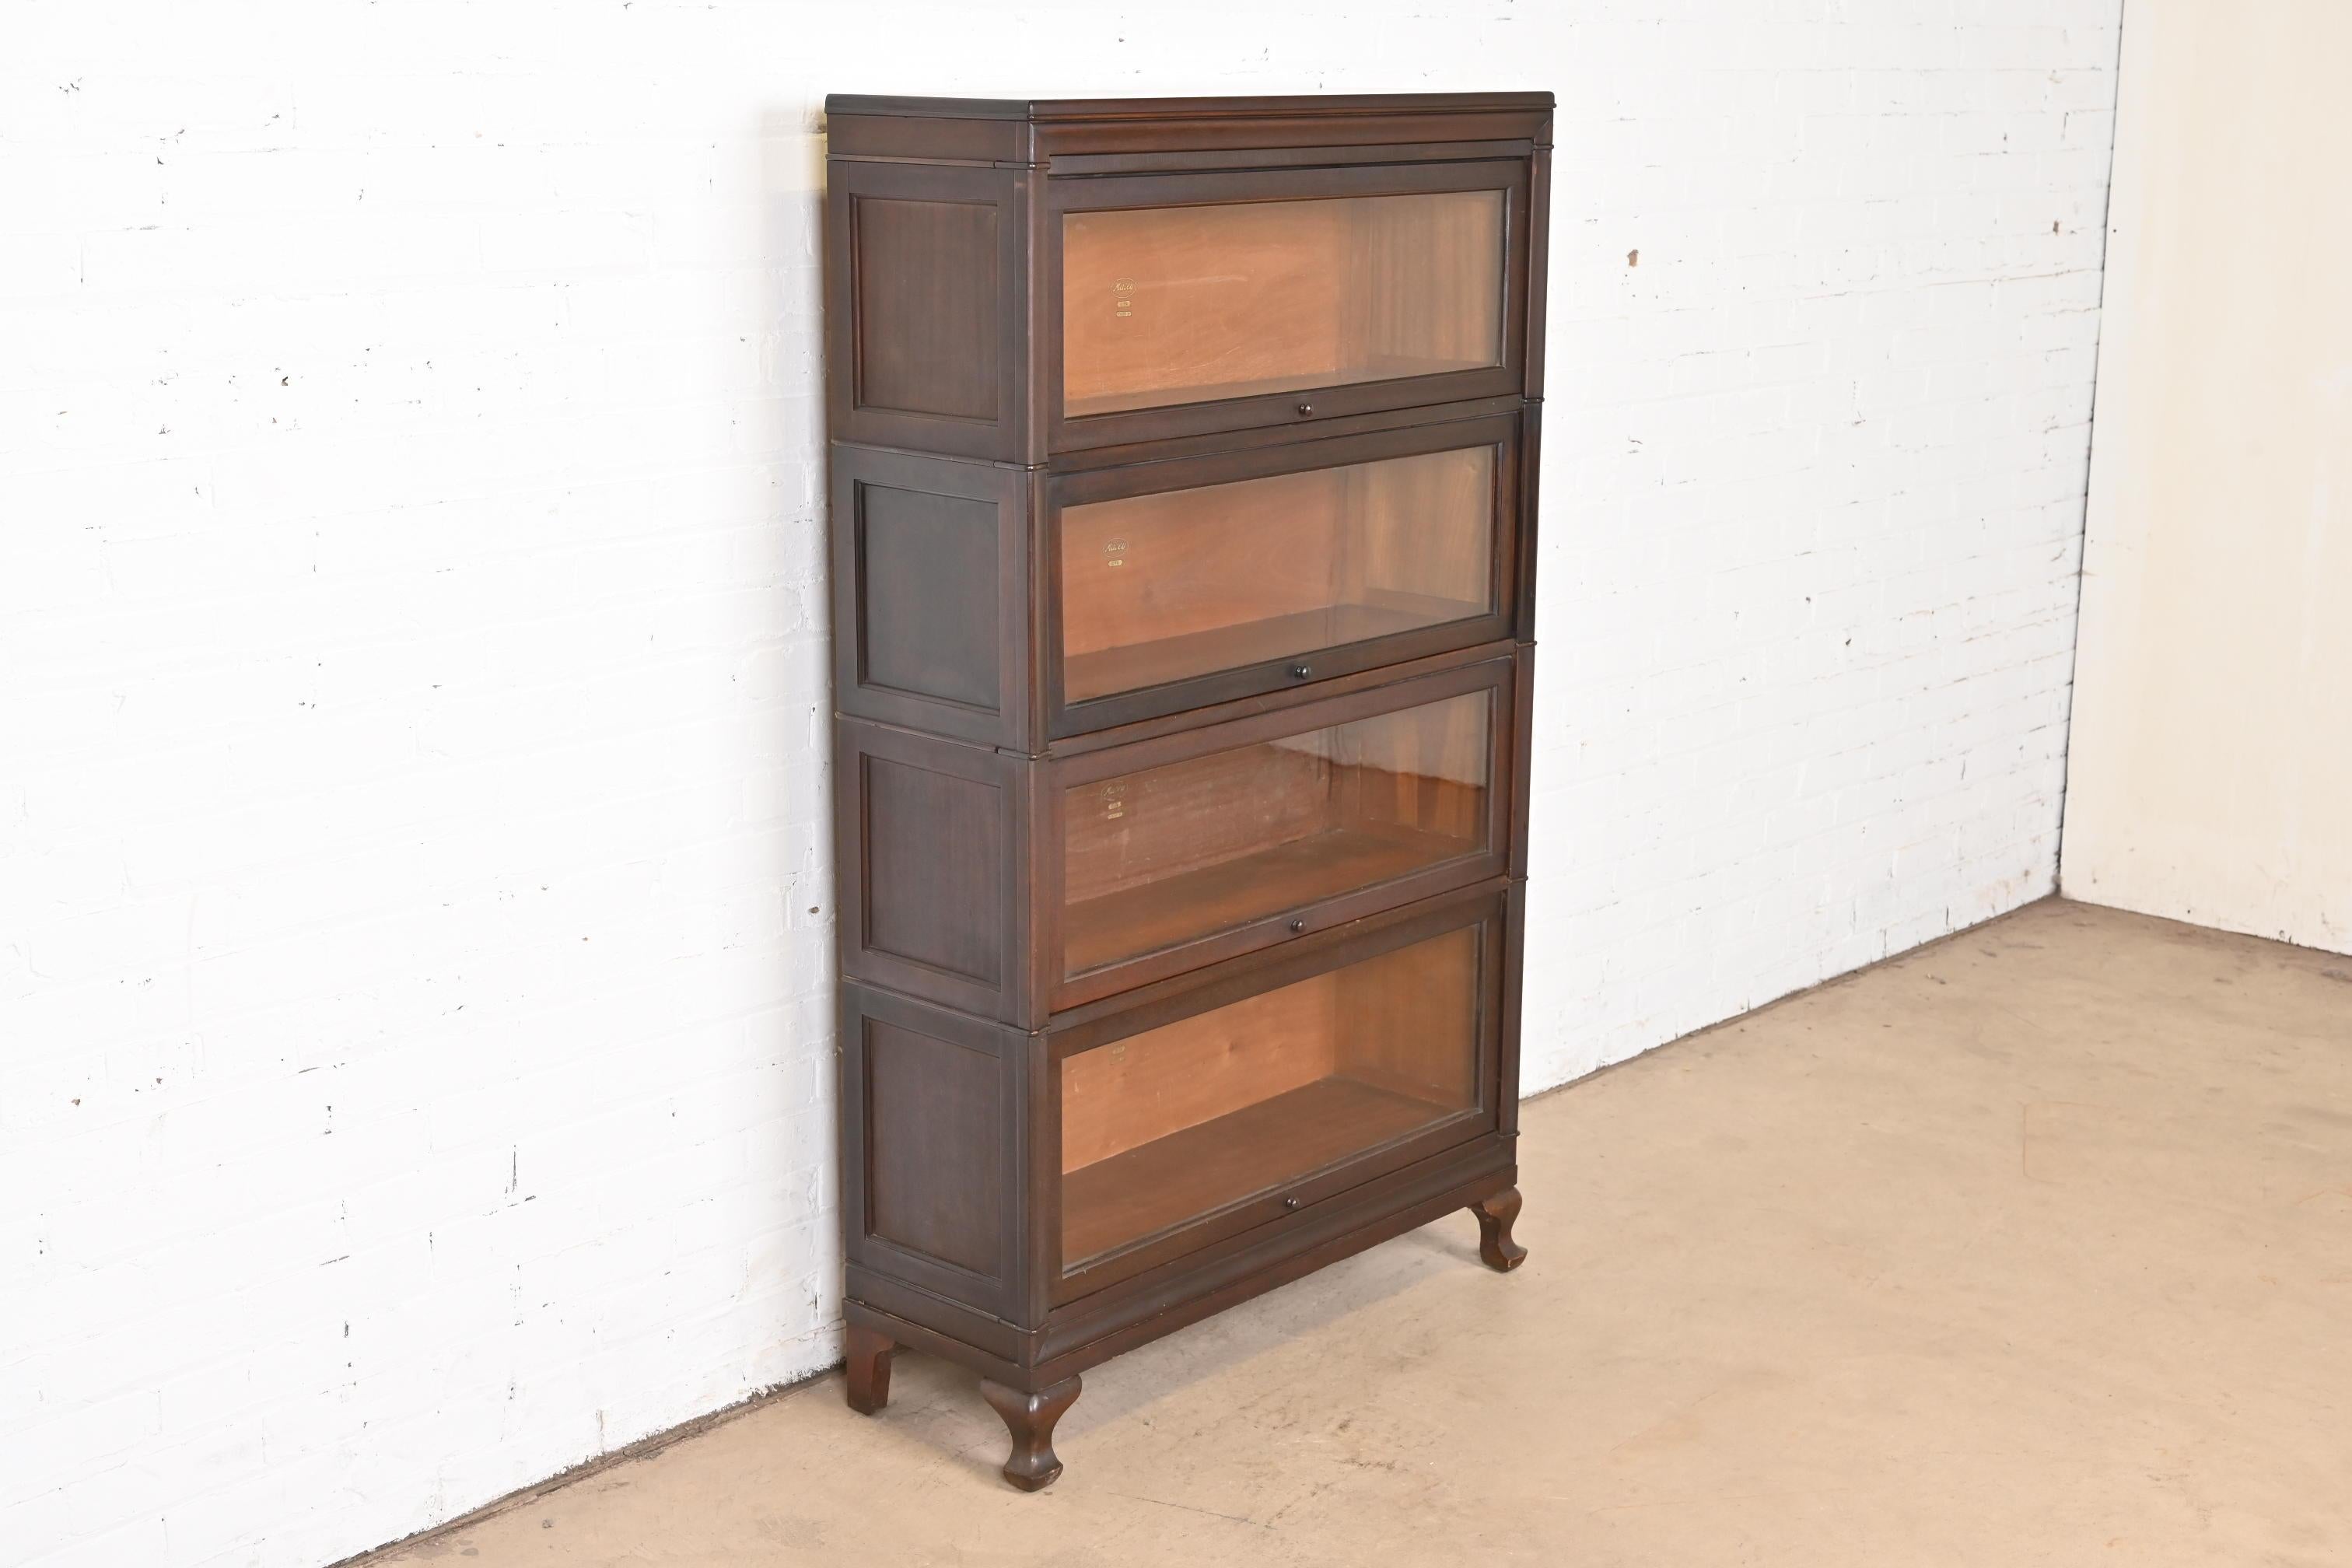 Antique Arts & Crafts Mahogany Four-Stack Barrister Bookcase by Macey, 1920s In Good Condition For Sale In South Bend, IN